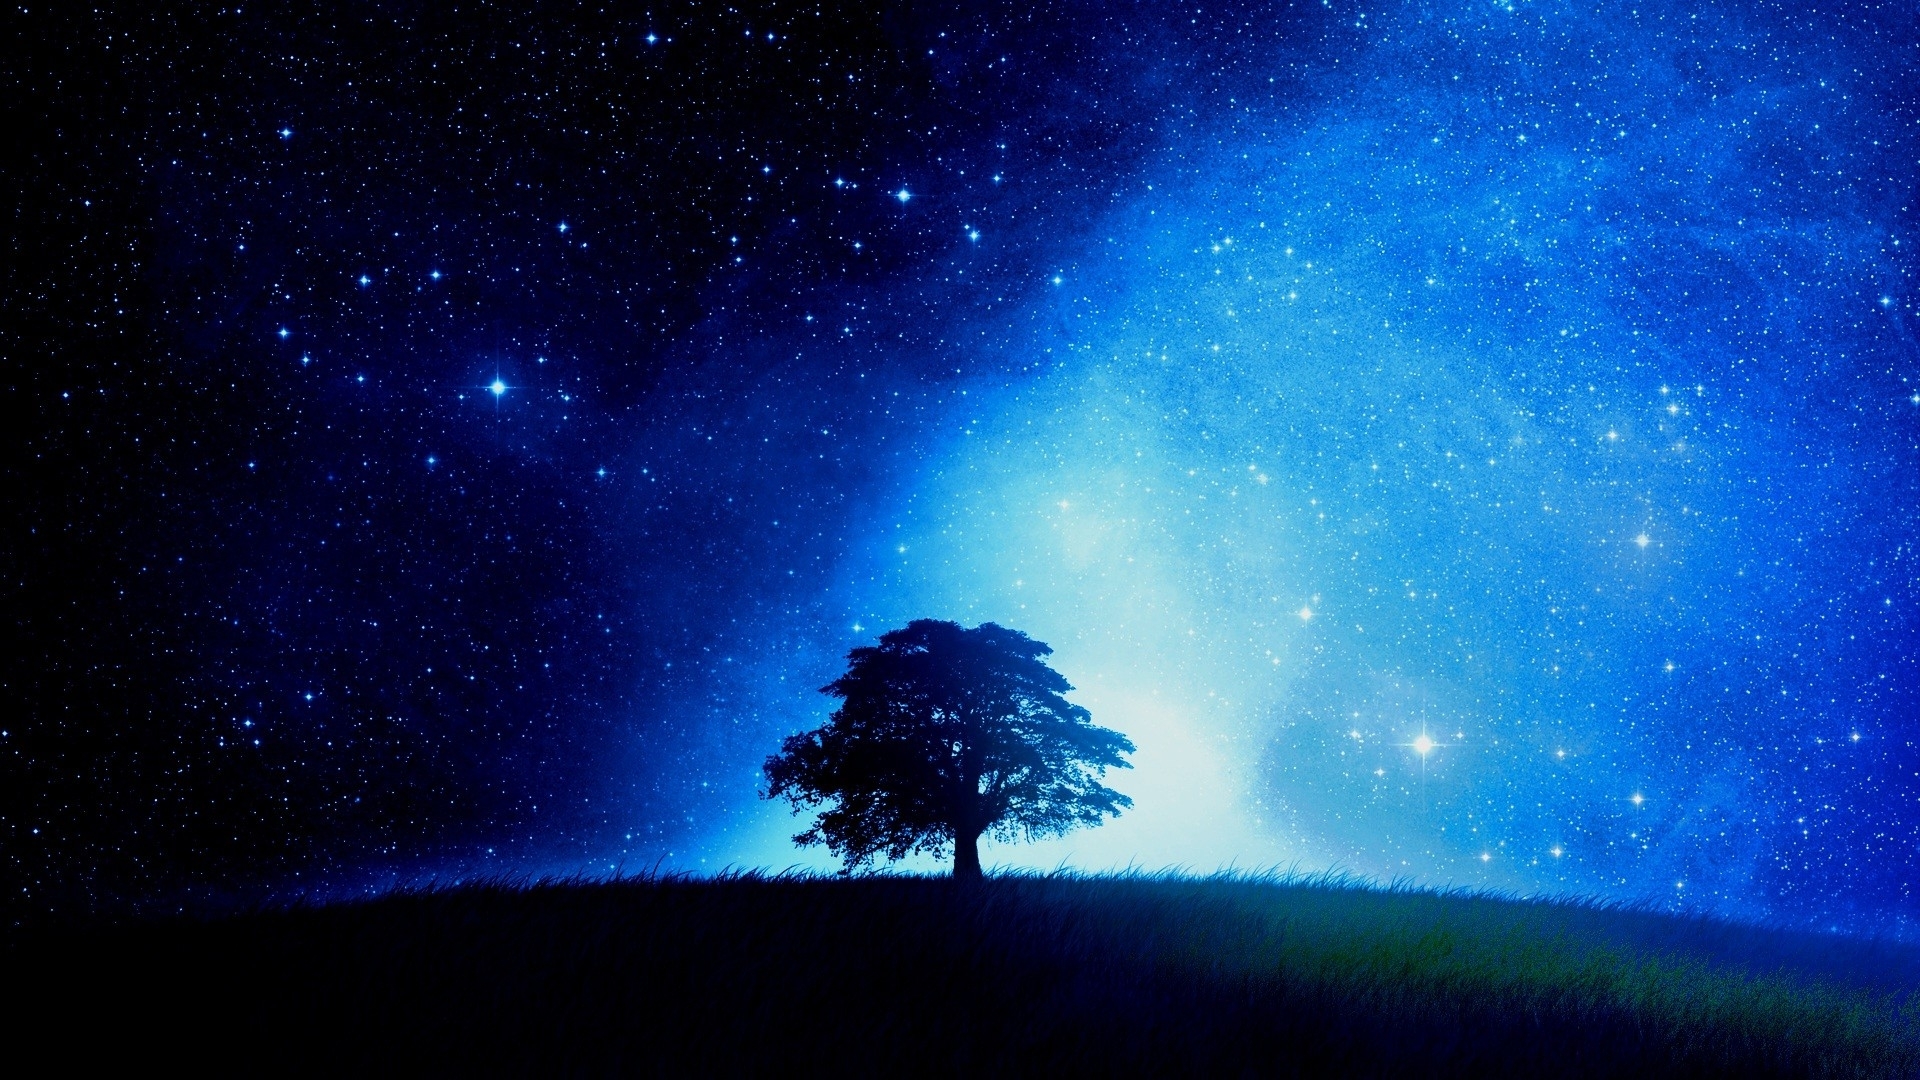 Wallpaper Blue and White Sky With Stars Background  Download Free Image